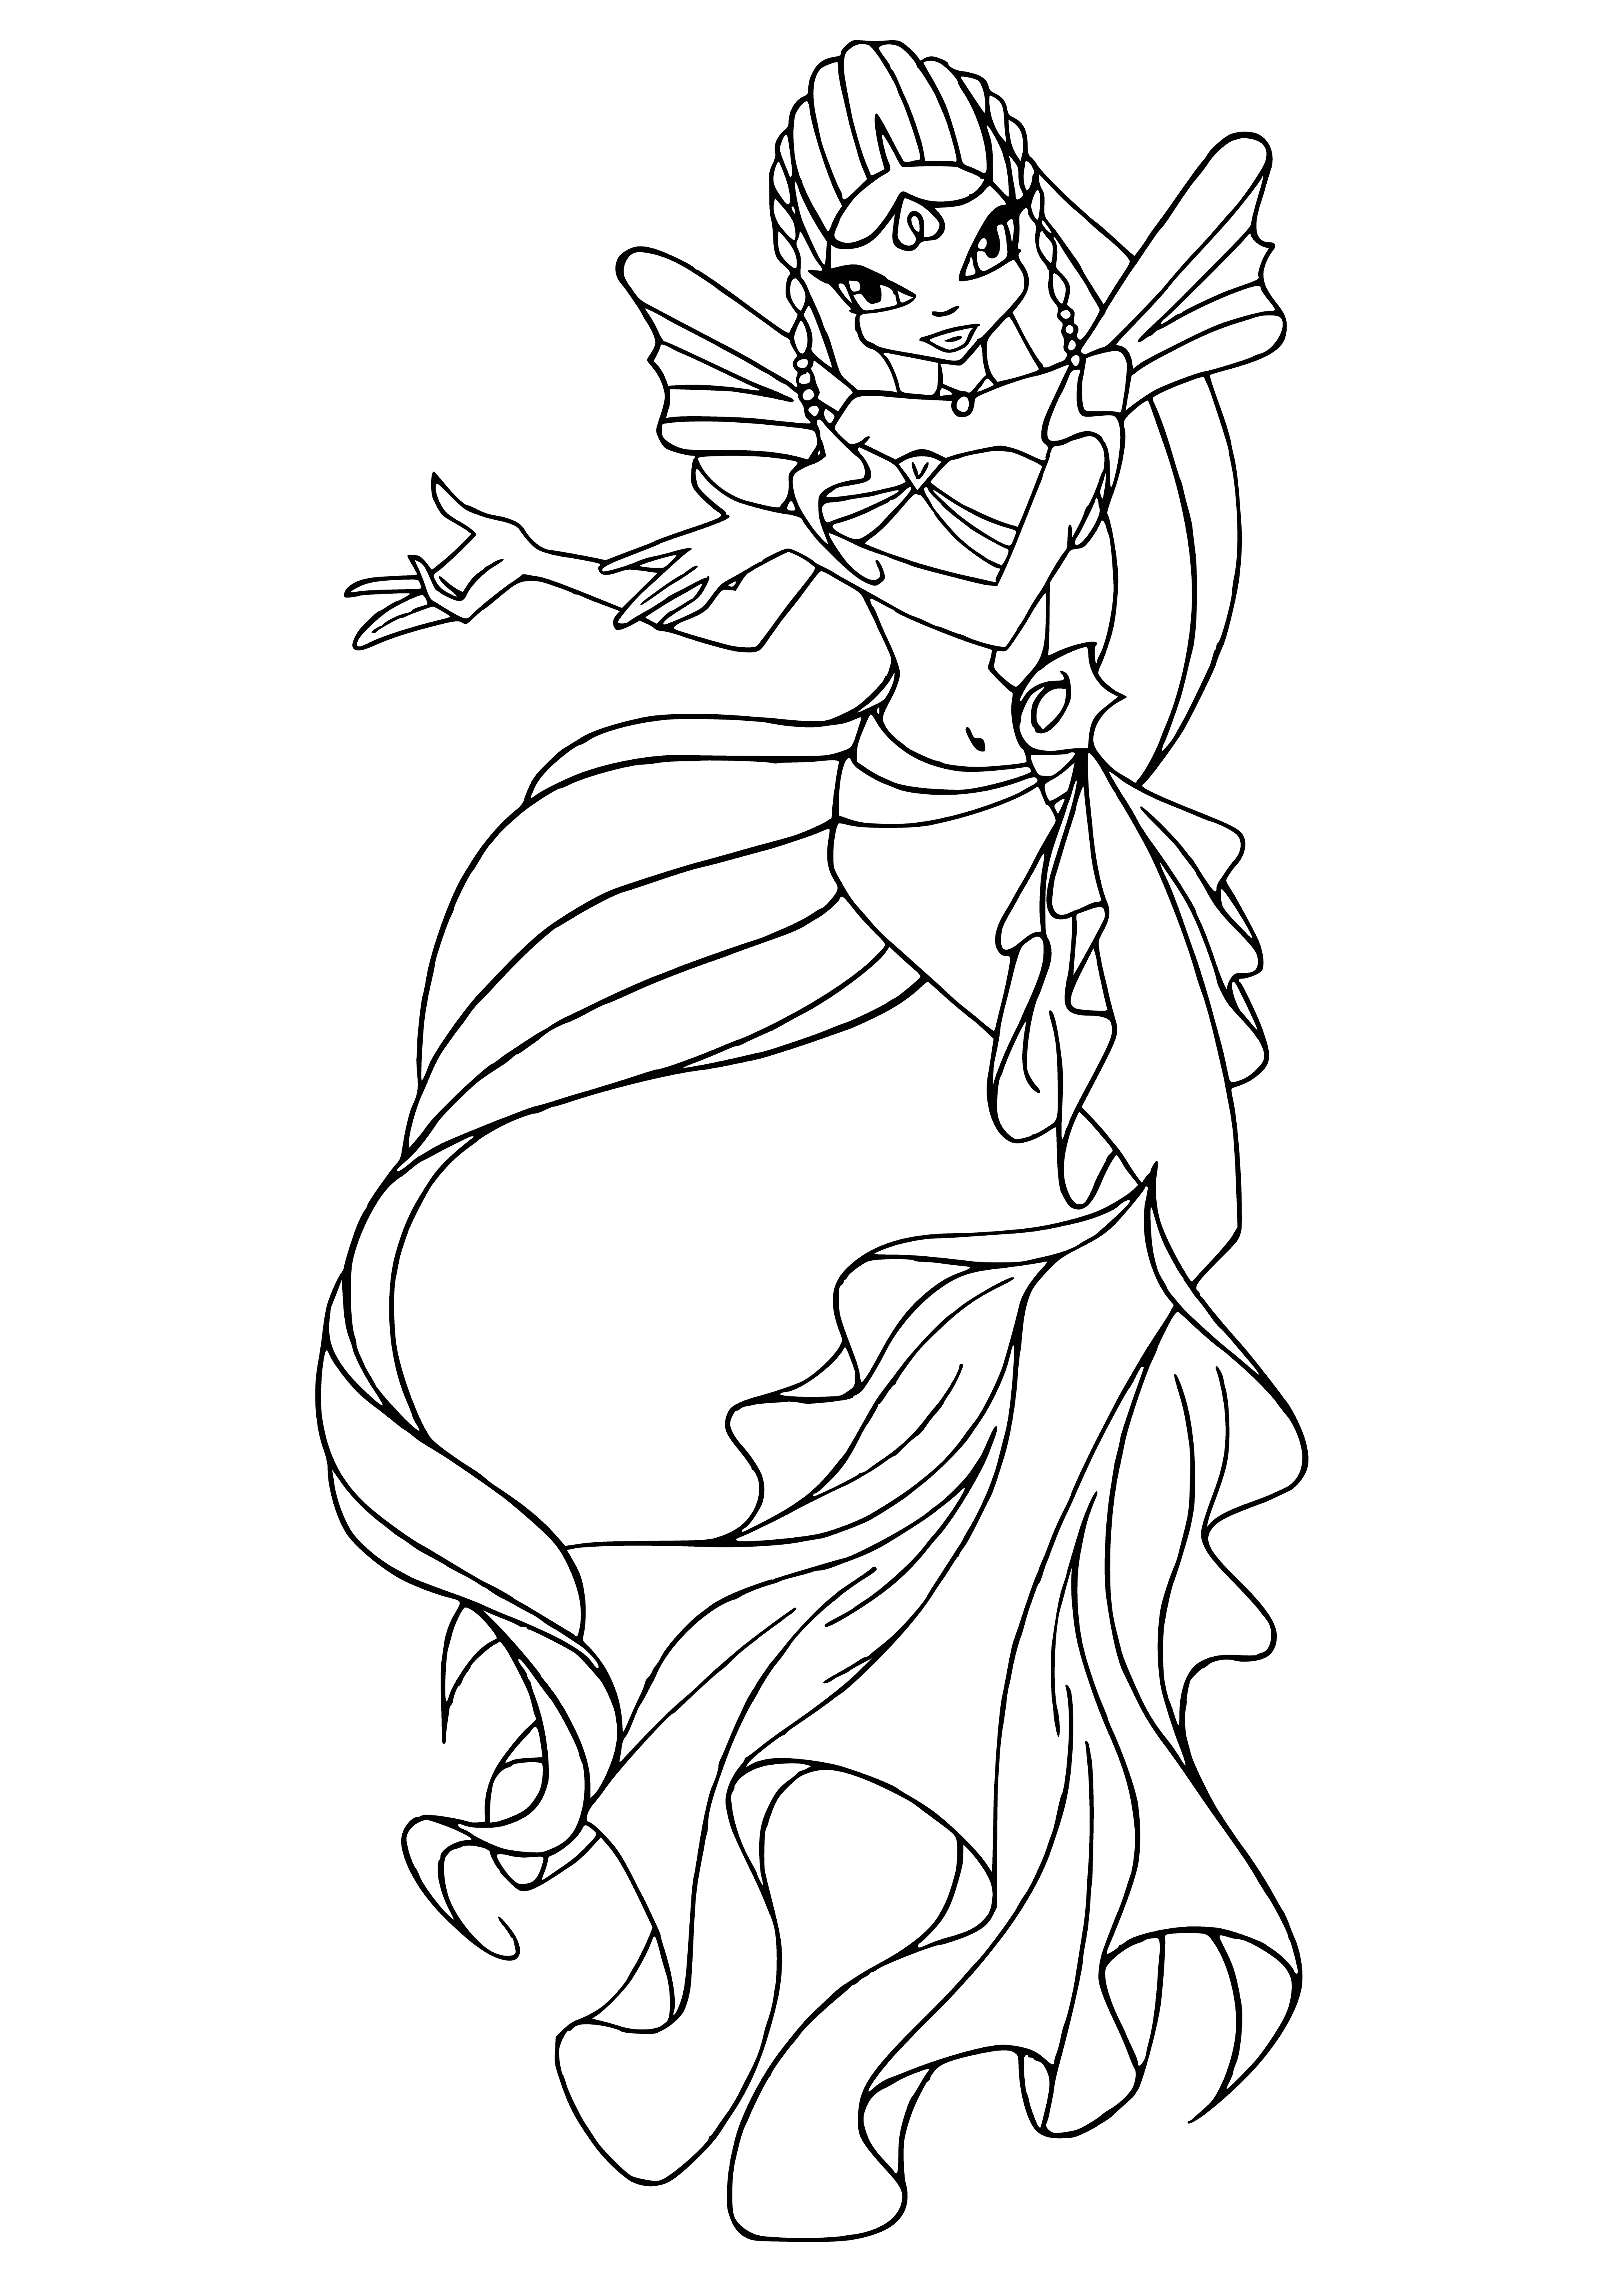 coloring page: #MermaidTala

Meet Tala, a happy mermaid surrounded by dolphin, turtle & seahorse. With long, flowing hair & a starfish pendant, she looks at viewer with joy. #MermaidTala